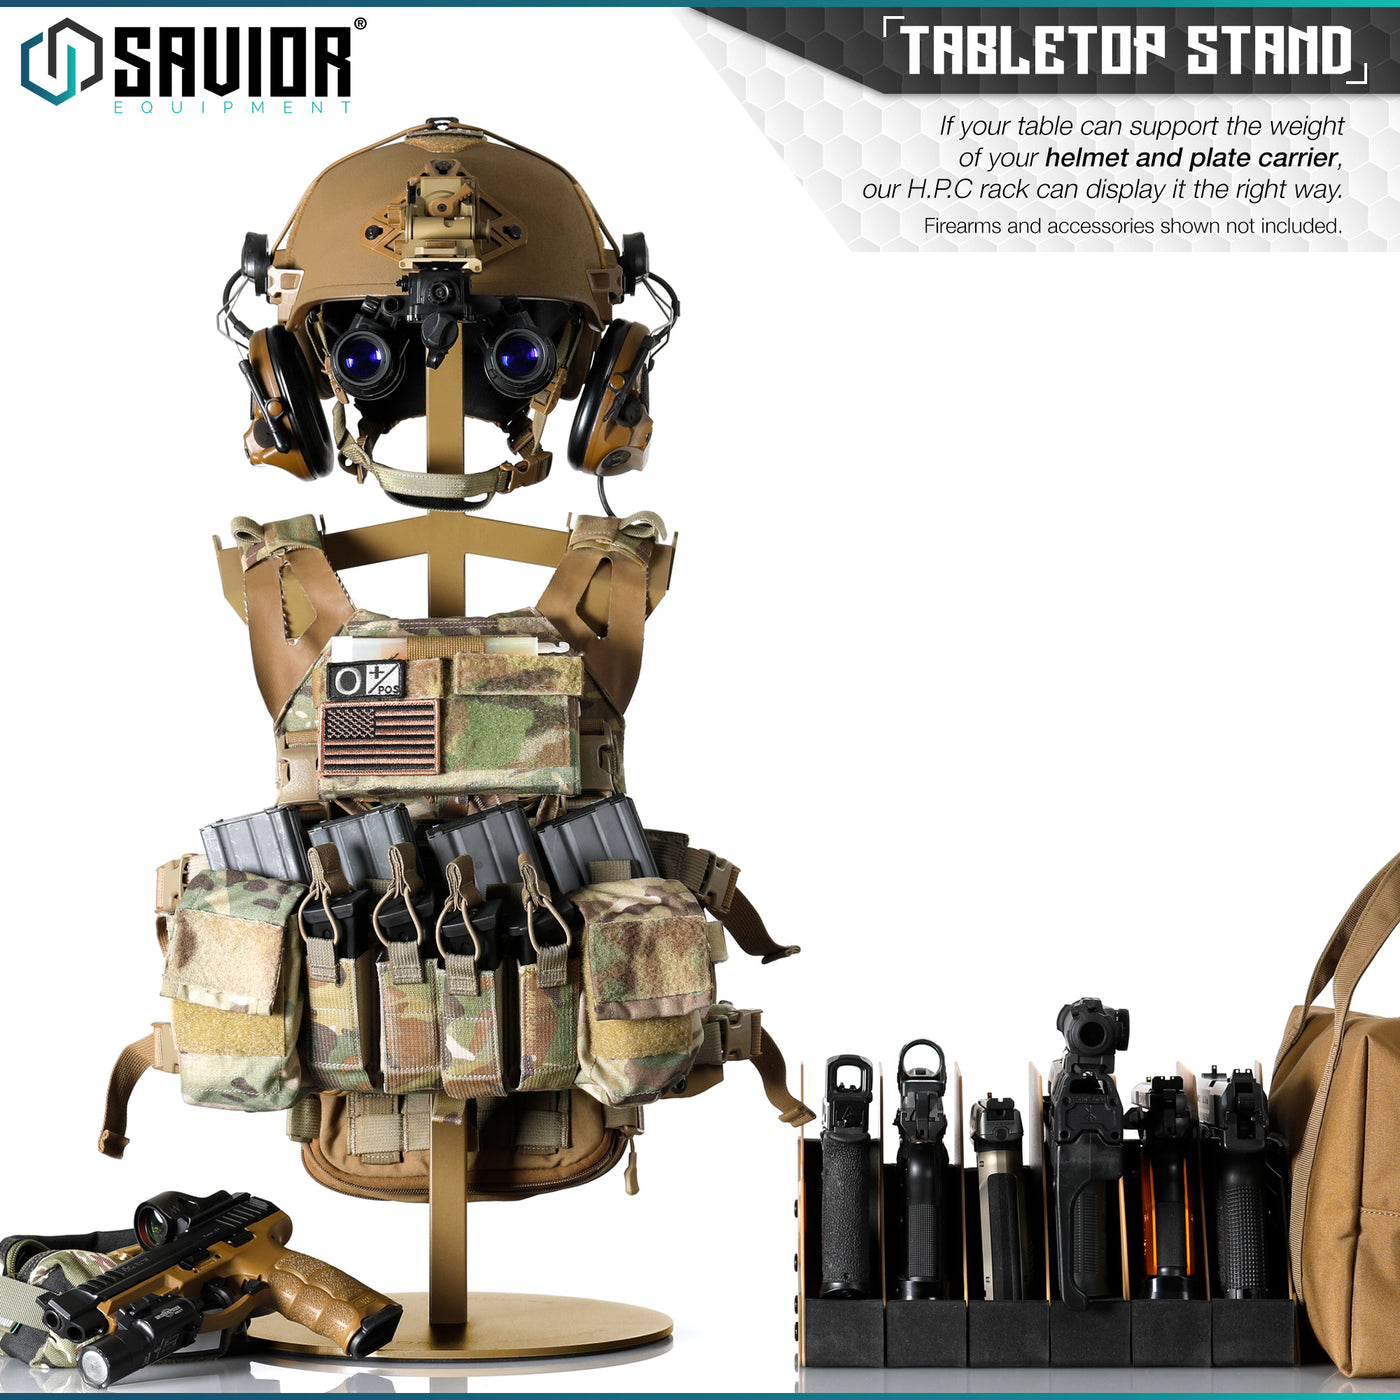 Tabletop Stand - If your table can support the weight of your helmet and plate carrier, our H.P.C rack can display it the right way.